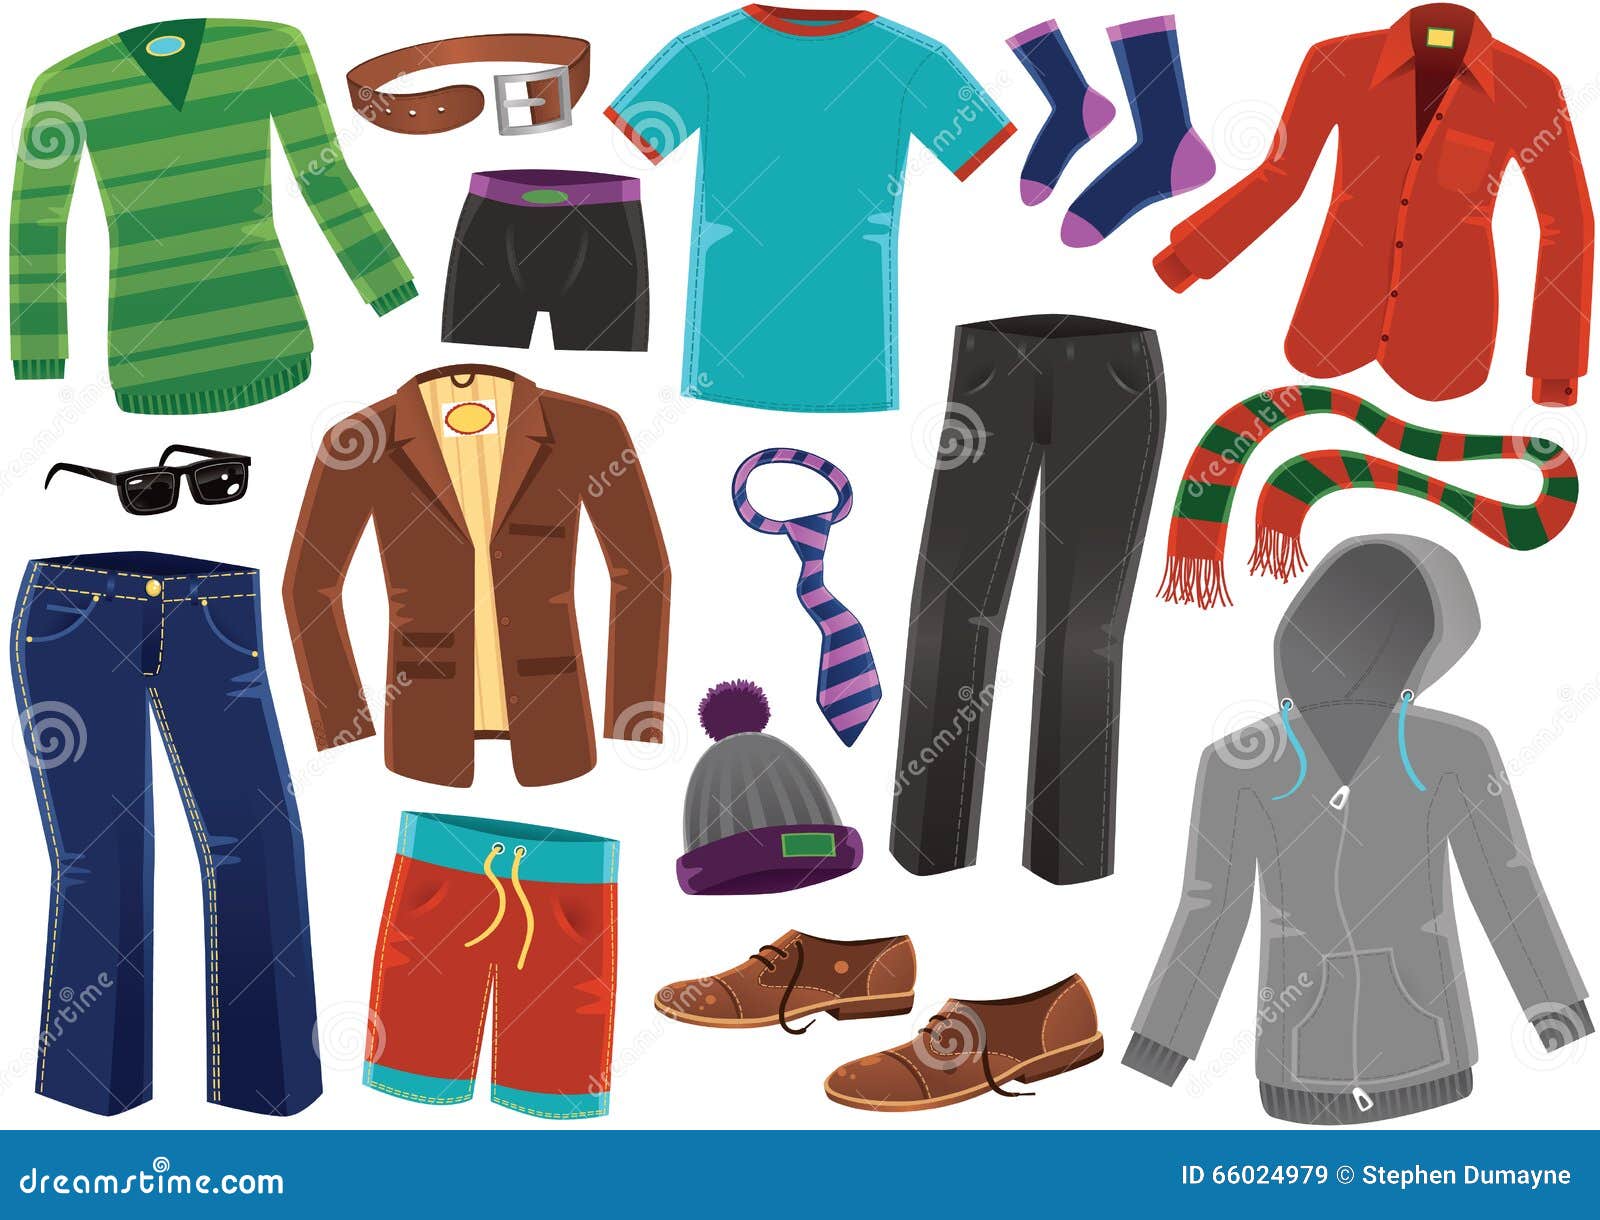 Various male clothing stock vector. Illustration of formal - 66024979